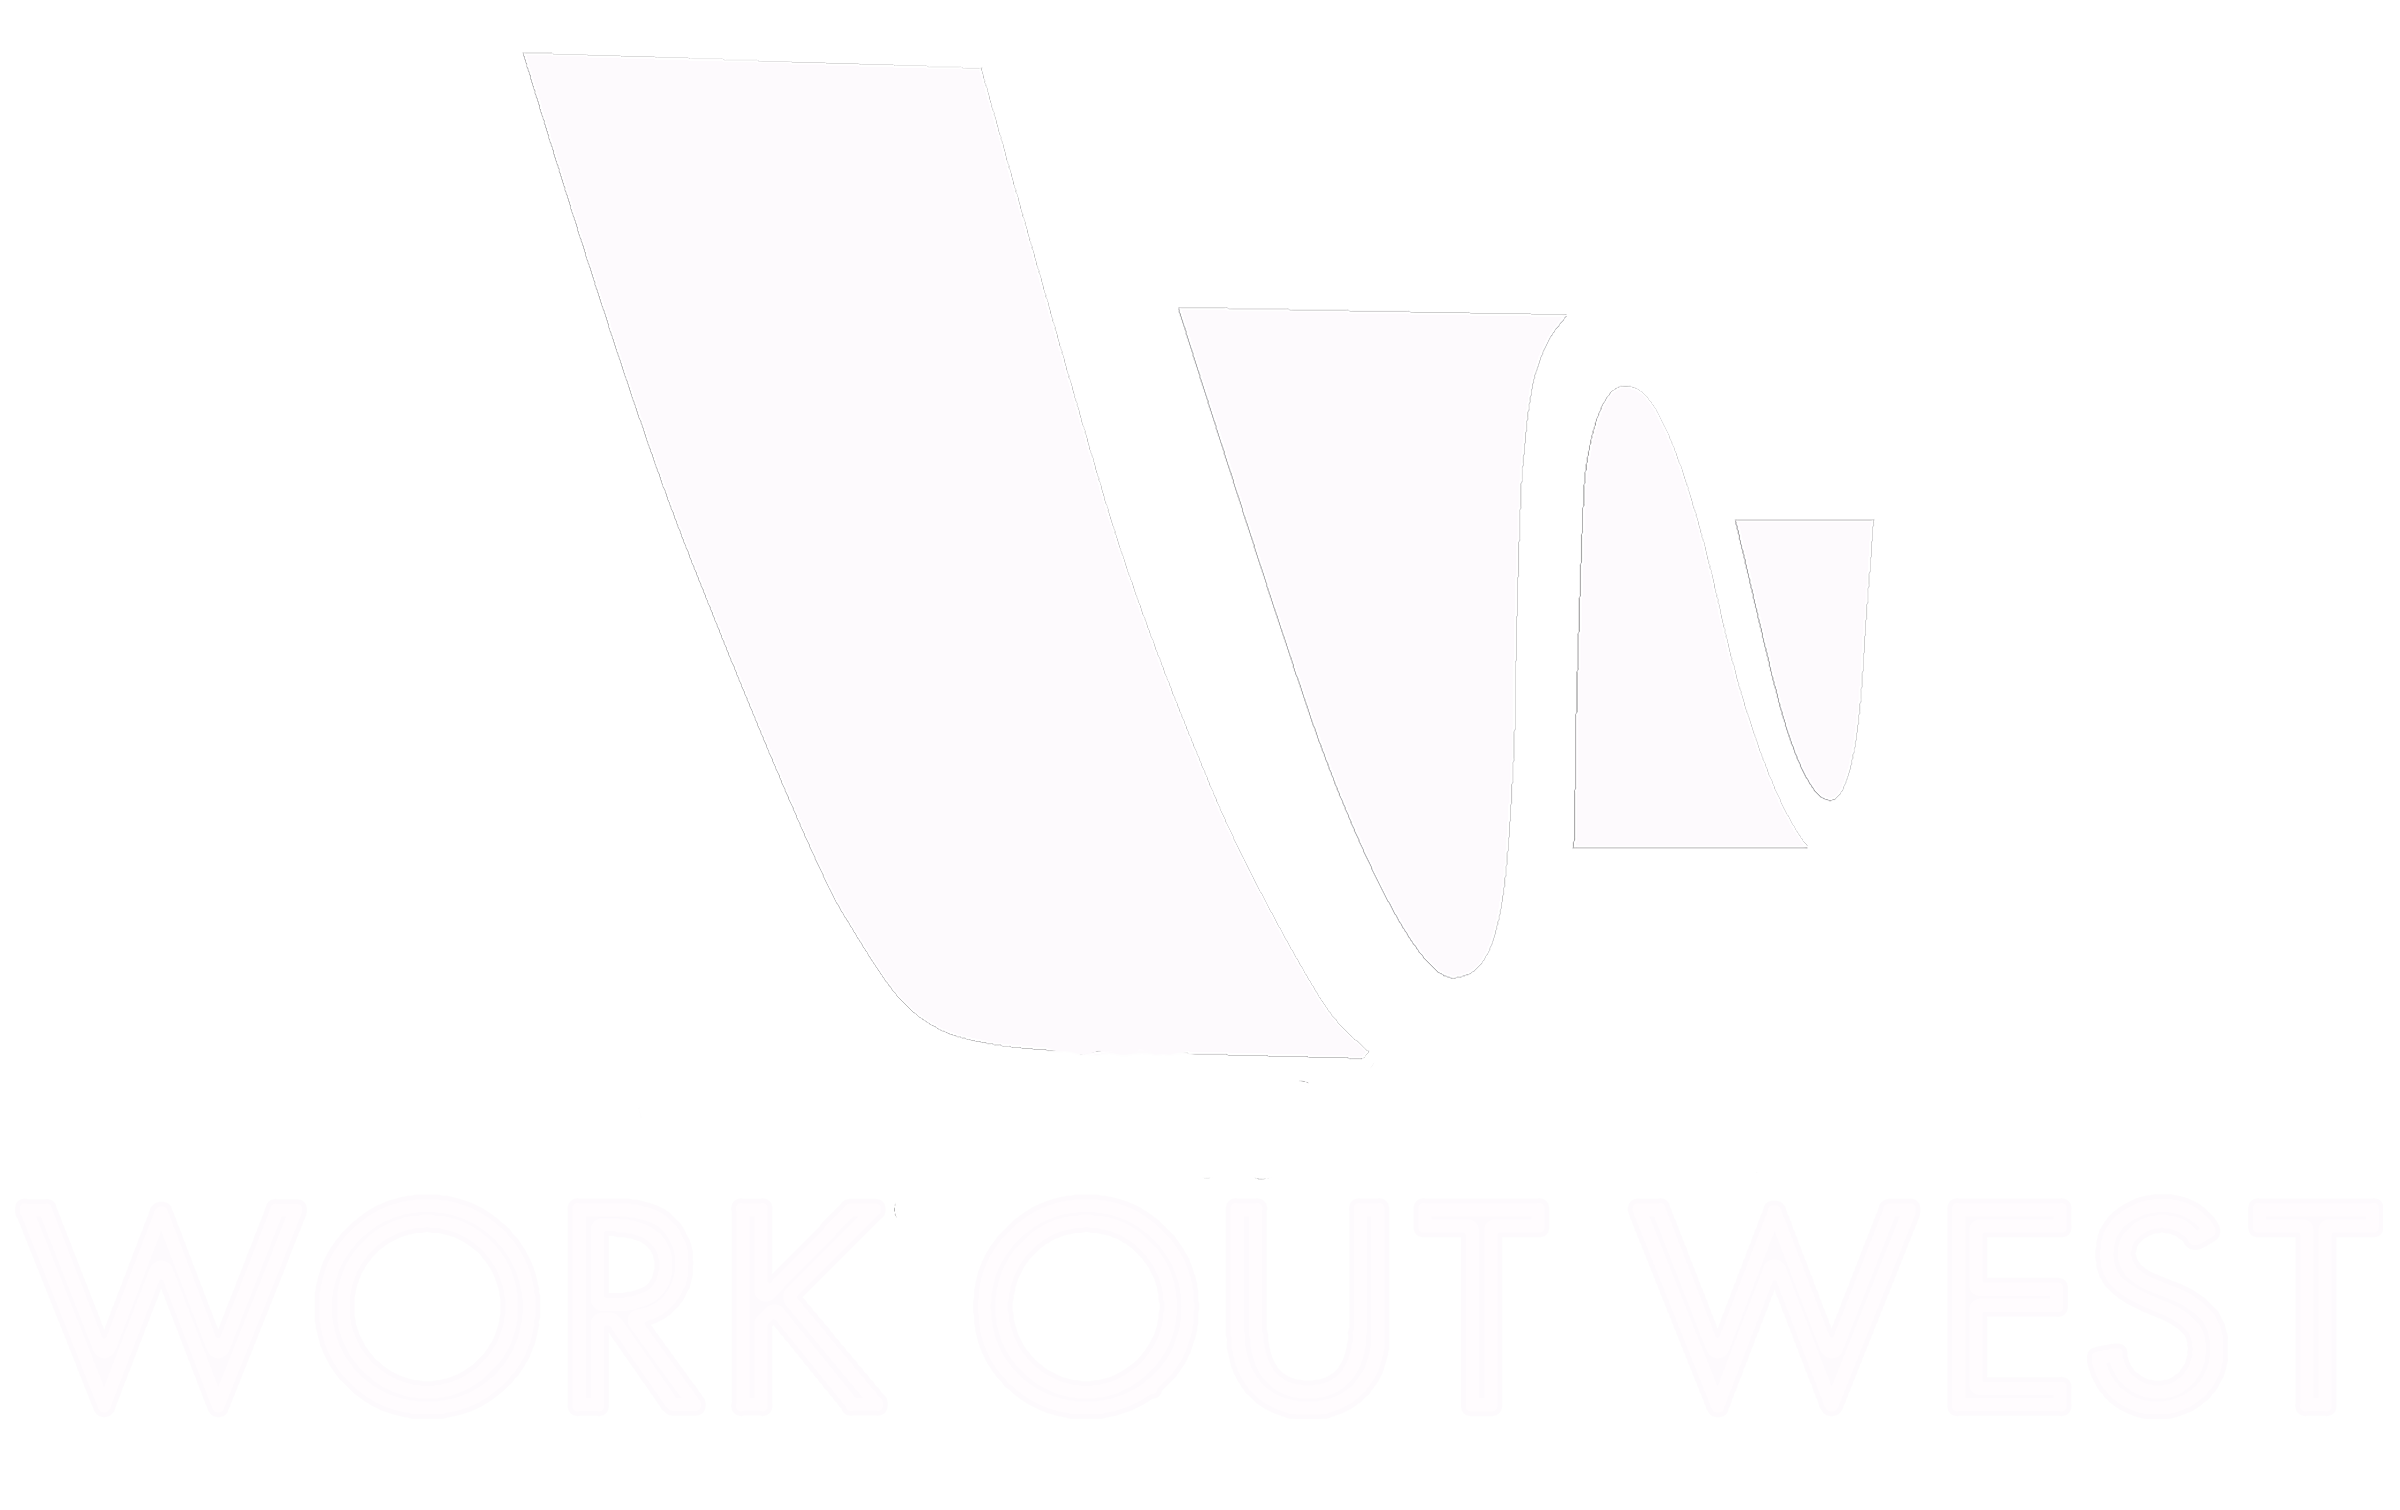 Workout West